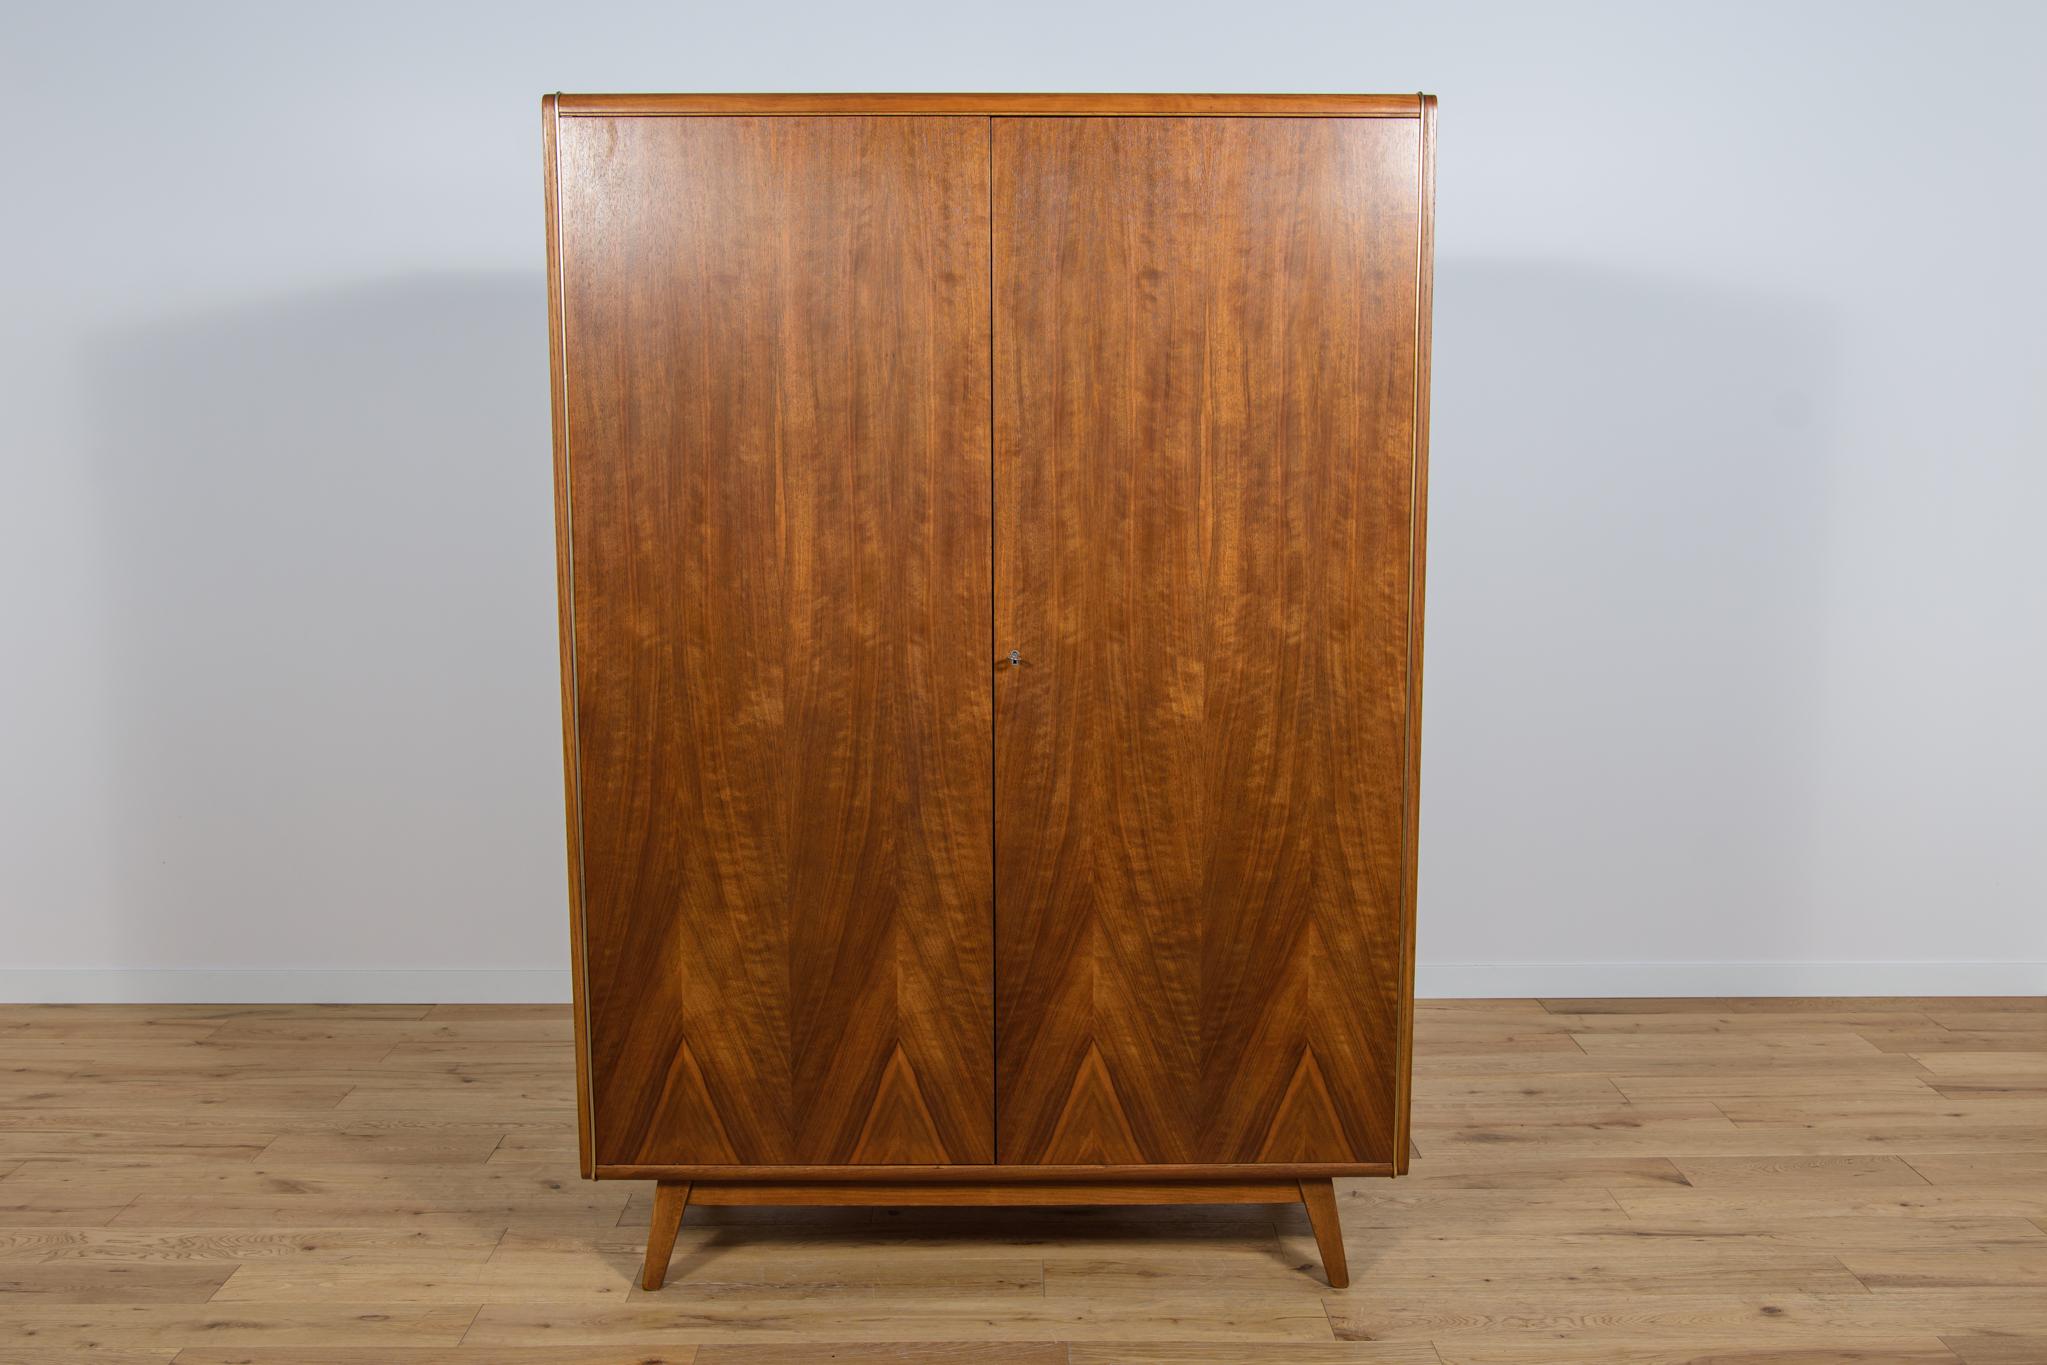 Sideboard produced by the Danish factory Westergaard Mobelfabrik in the 1960s. Sideboard made of teak wood. The chest of drawers consists of four sliding doors and shelves inside. The sideboard has a high-class finish and wonderful details with